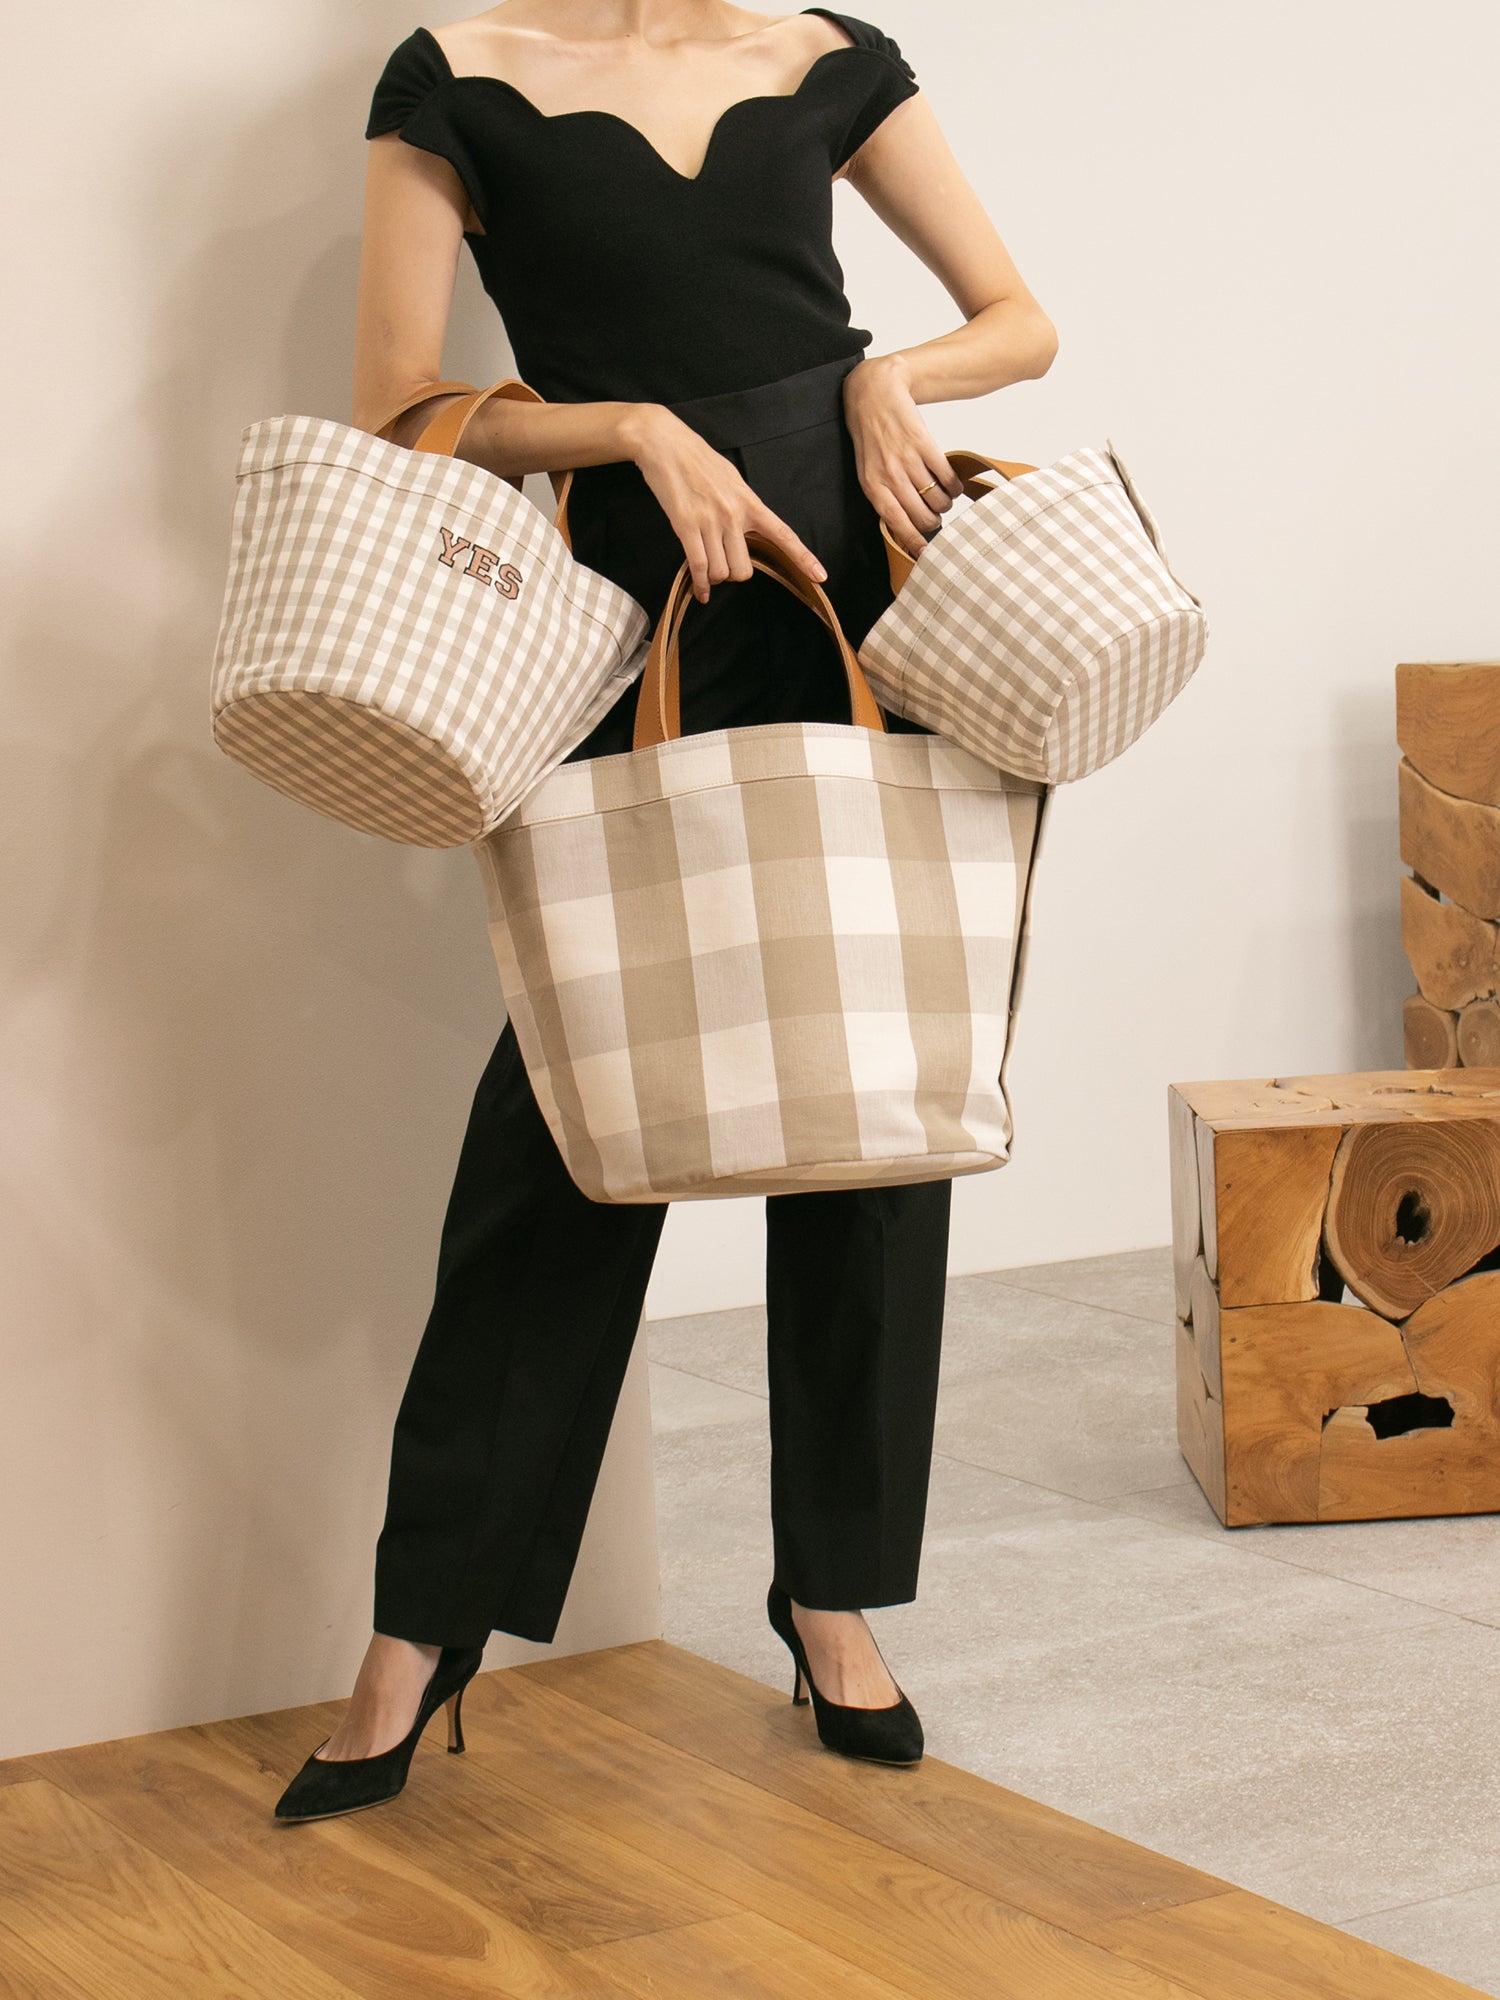 WEB限定] Gingham check tote XS— LUDLOW STORE